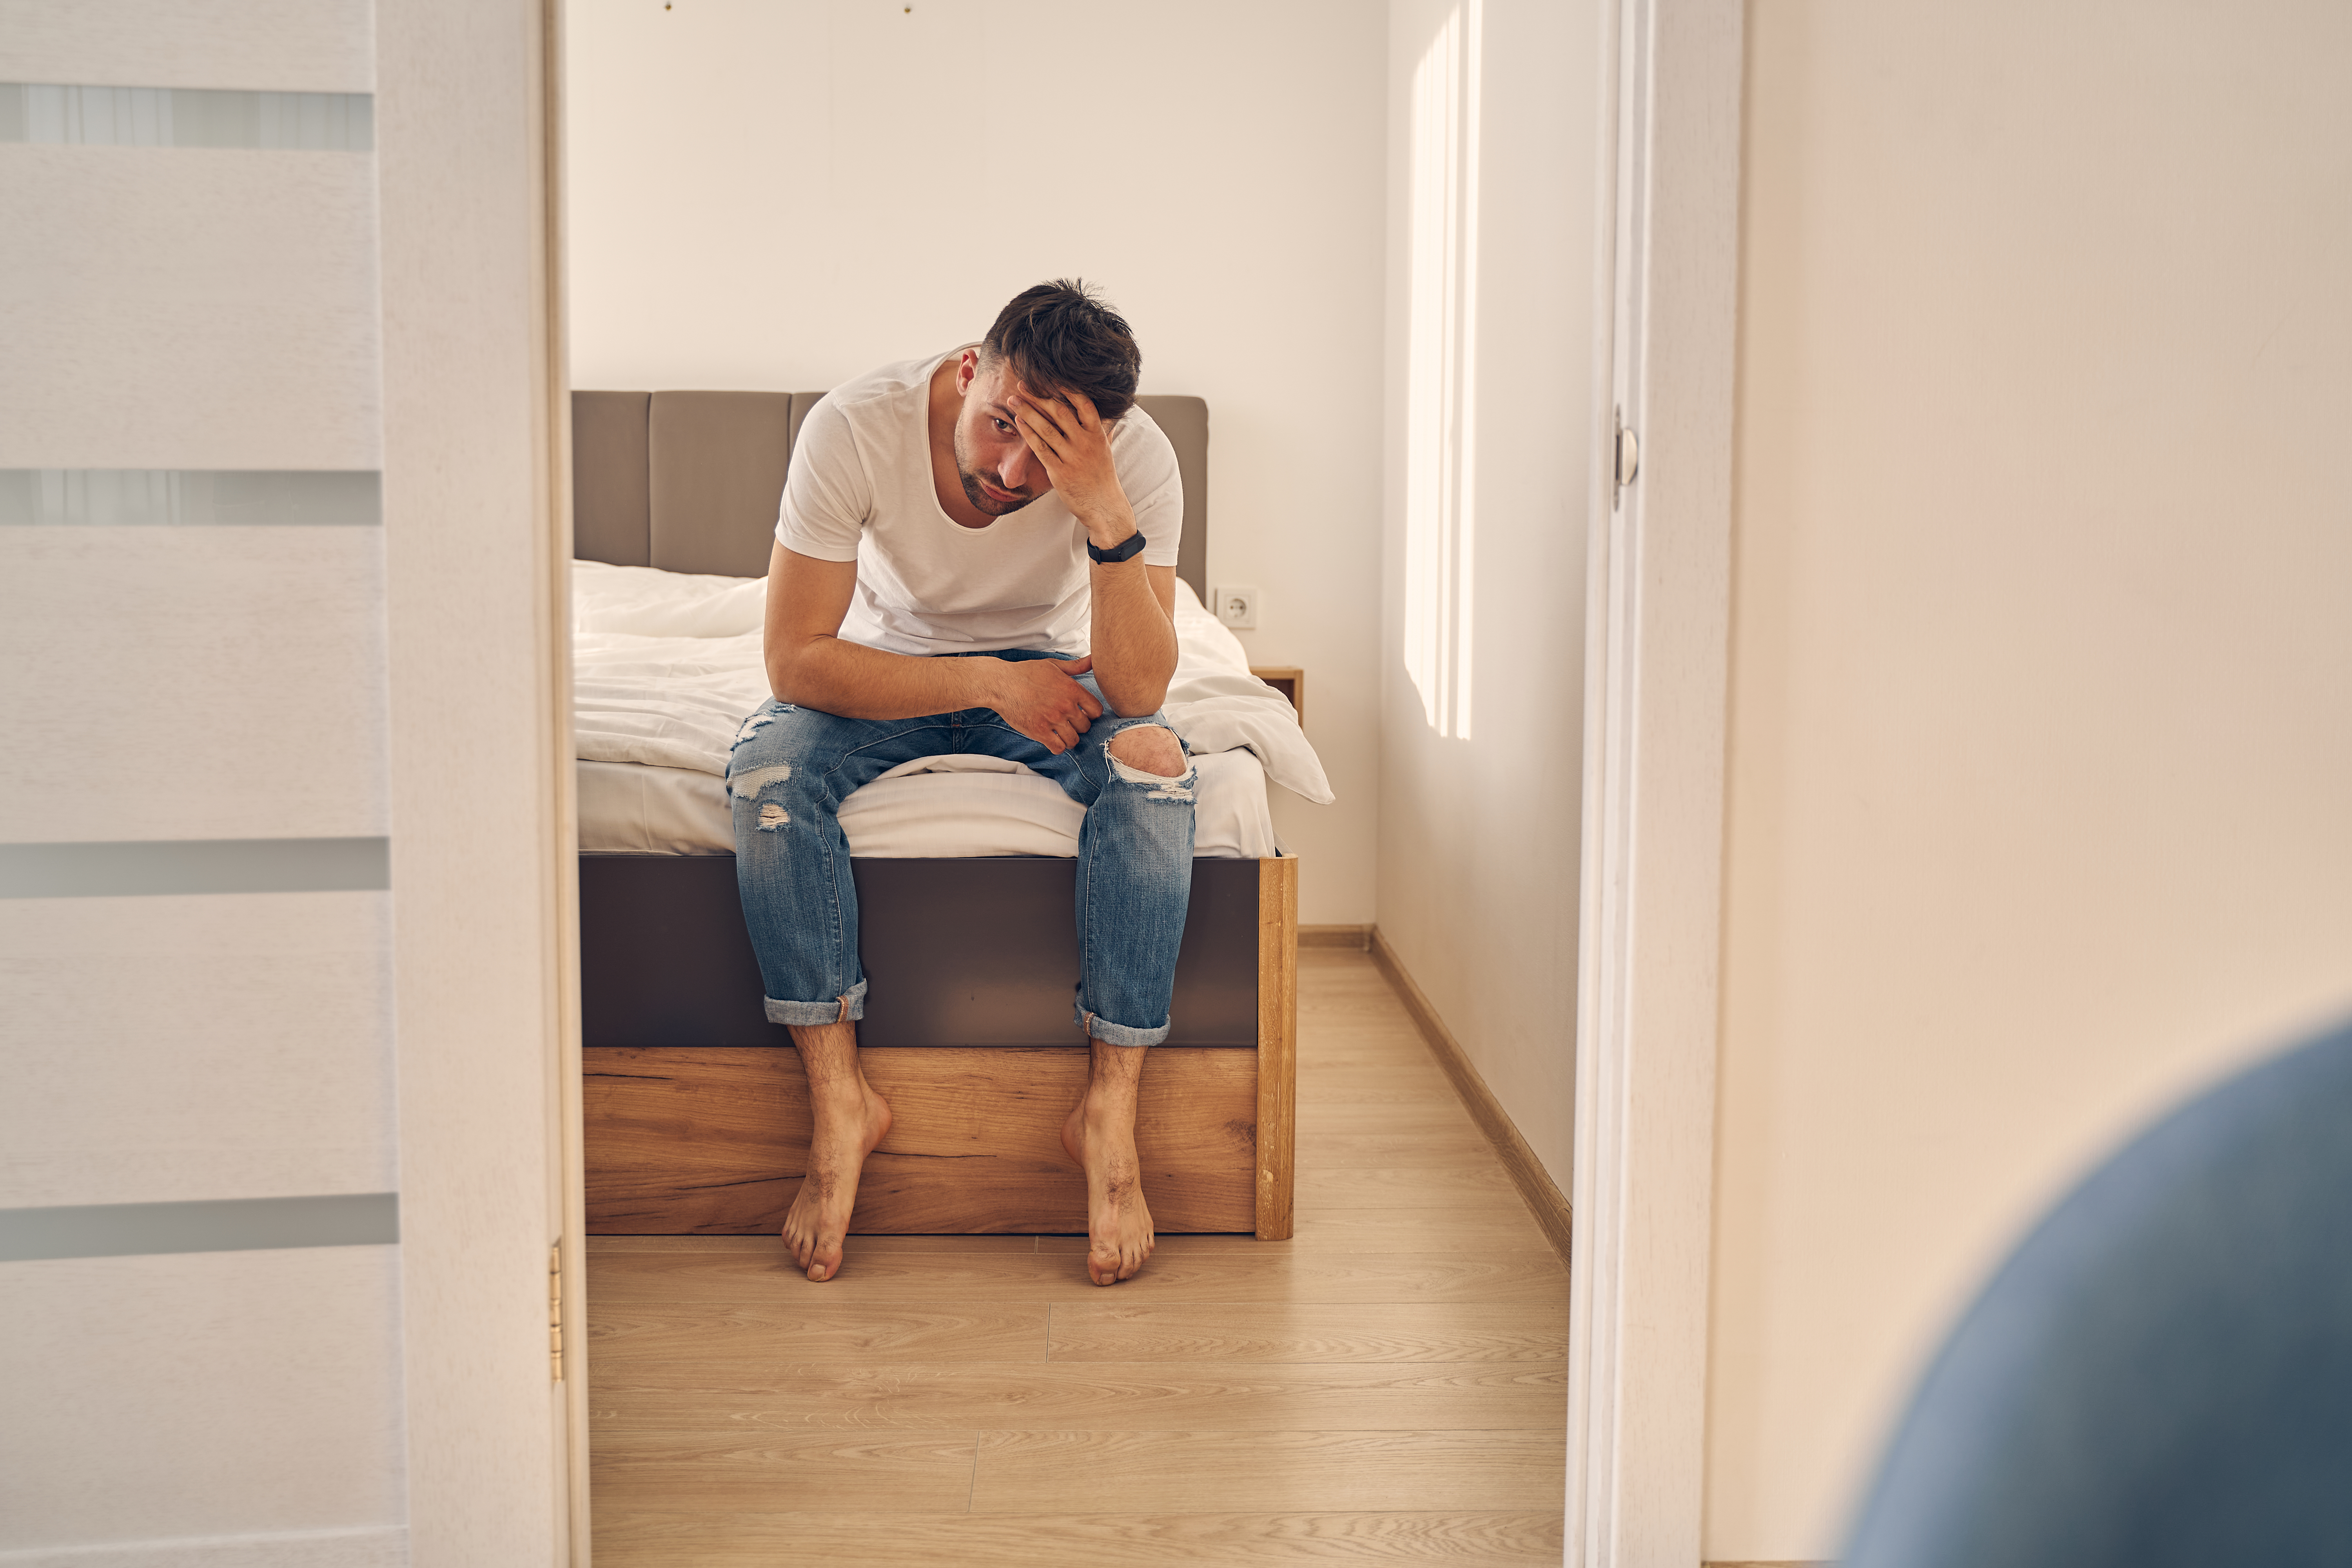 A troubled man sitting on the bed | Source: Shutterstock